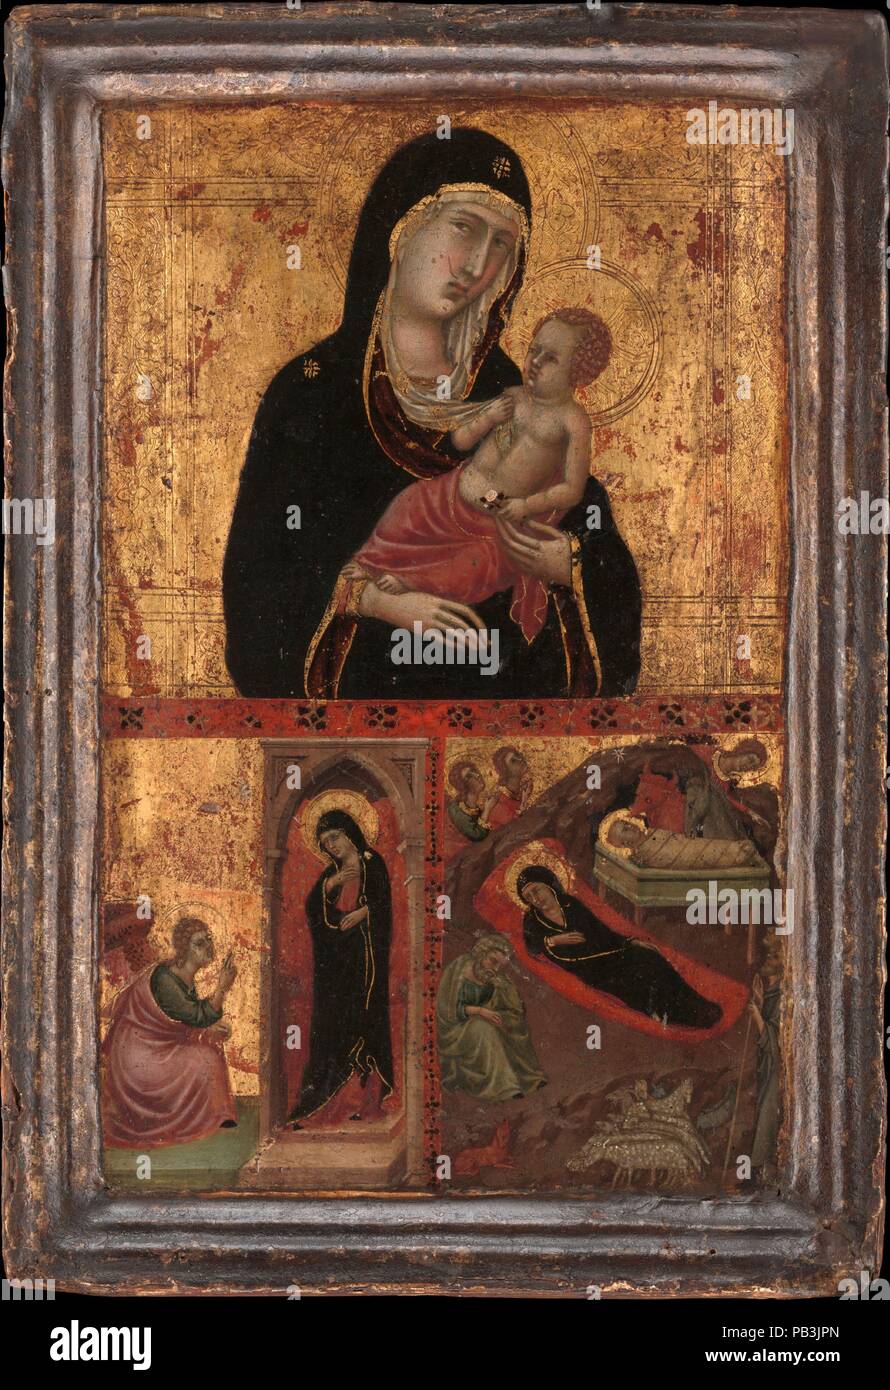 Madonna and Child with the Annunciation and the Nativity. Artist: Goodhart Ducciesque Master (Italian, Siena, active ca. 1315-30). Dimensions: Overall, with engaged frame, 12 1/8 x 8 1/4 in. (30.8 x 21 cm); painted surface 10 1/4 x 6 1/2 in. (26 x 16.5 cm). Date: ca. 1310-15.    This delicately painted panel is by a close follower of Duccio and employs some of his favorite devices, such as the Child playing with the veil of the Virgin, who engages the gaze of the viewer-worshipper. Its small size made it perfect for private devotion, as it could be easily moved. The scenes of the Annunciation  Stock Photo